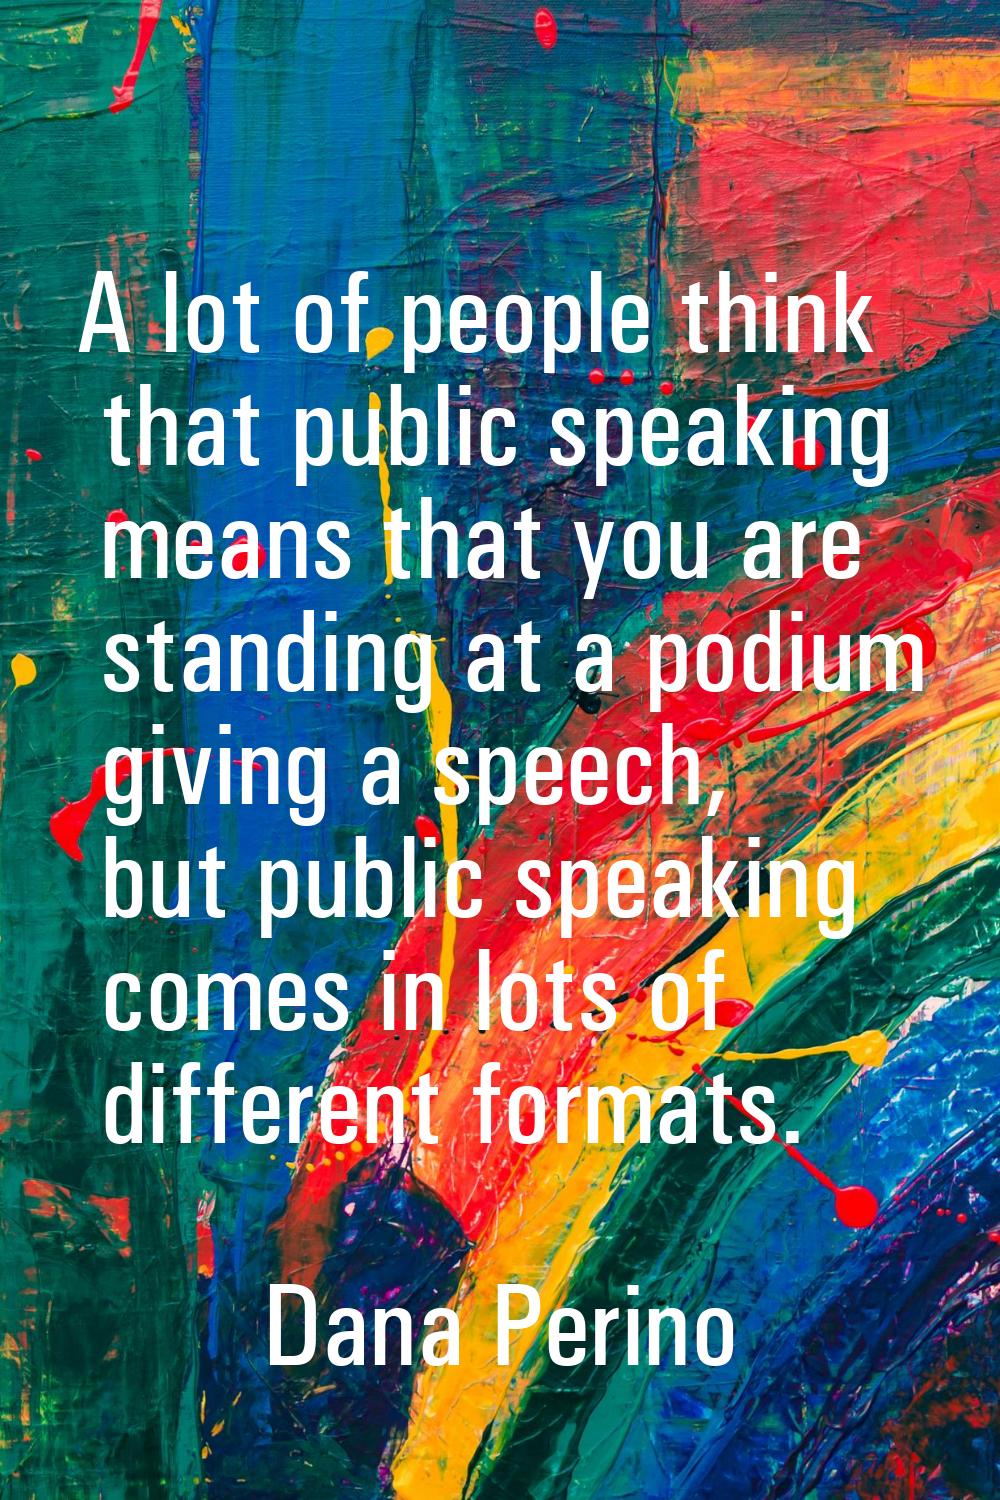 A lot of people think that public speaking means that you are standing at a podium giving a speech,